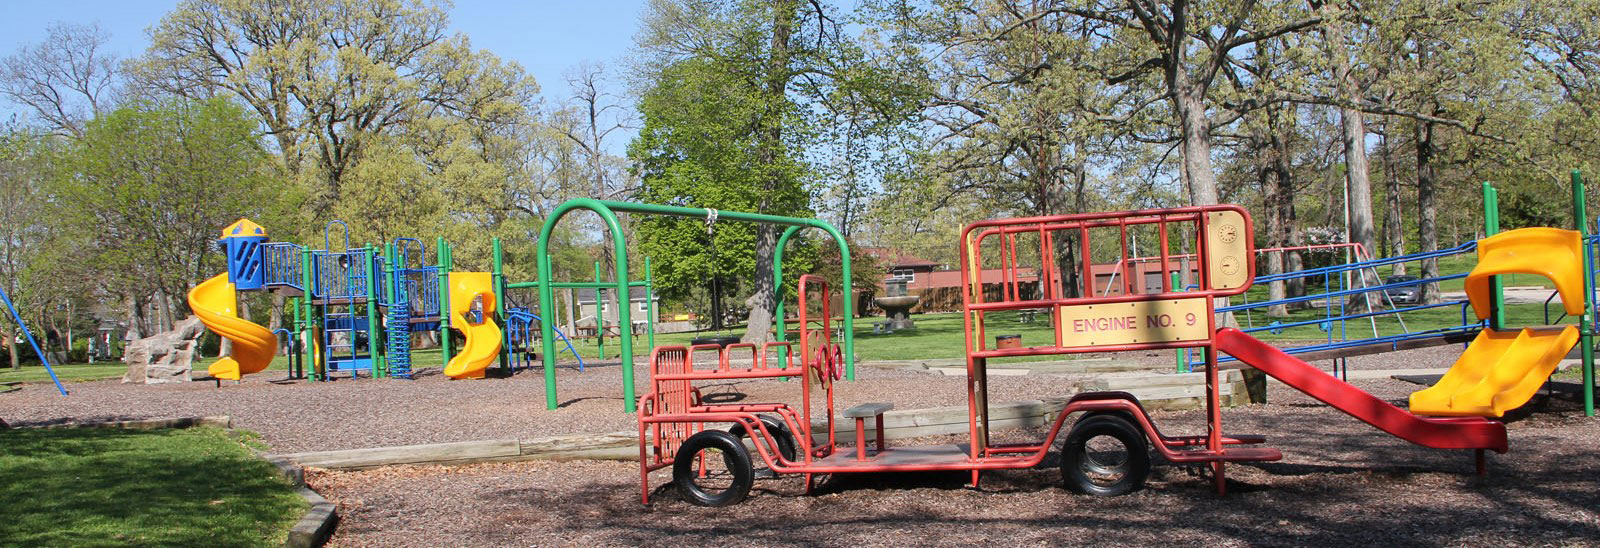 The playground at Bever Park